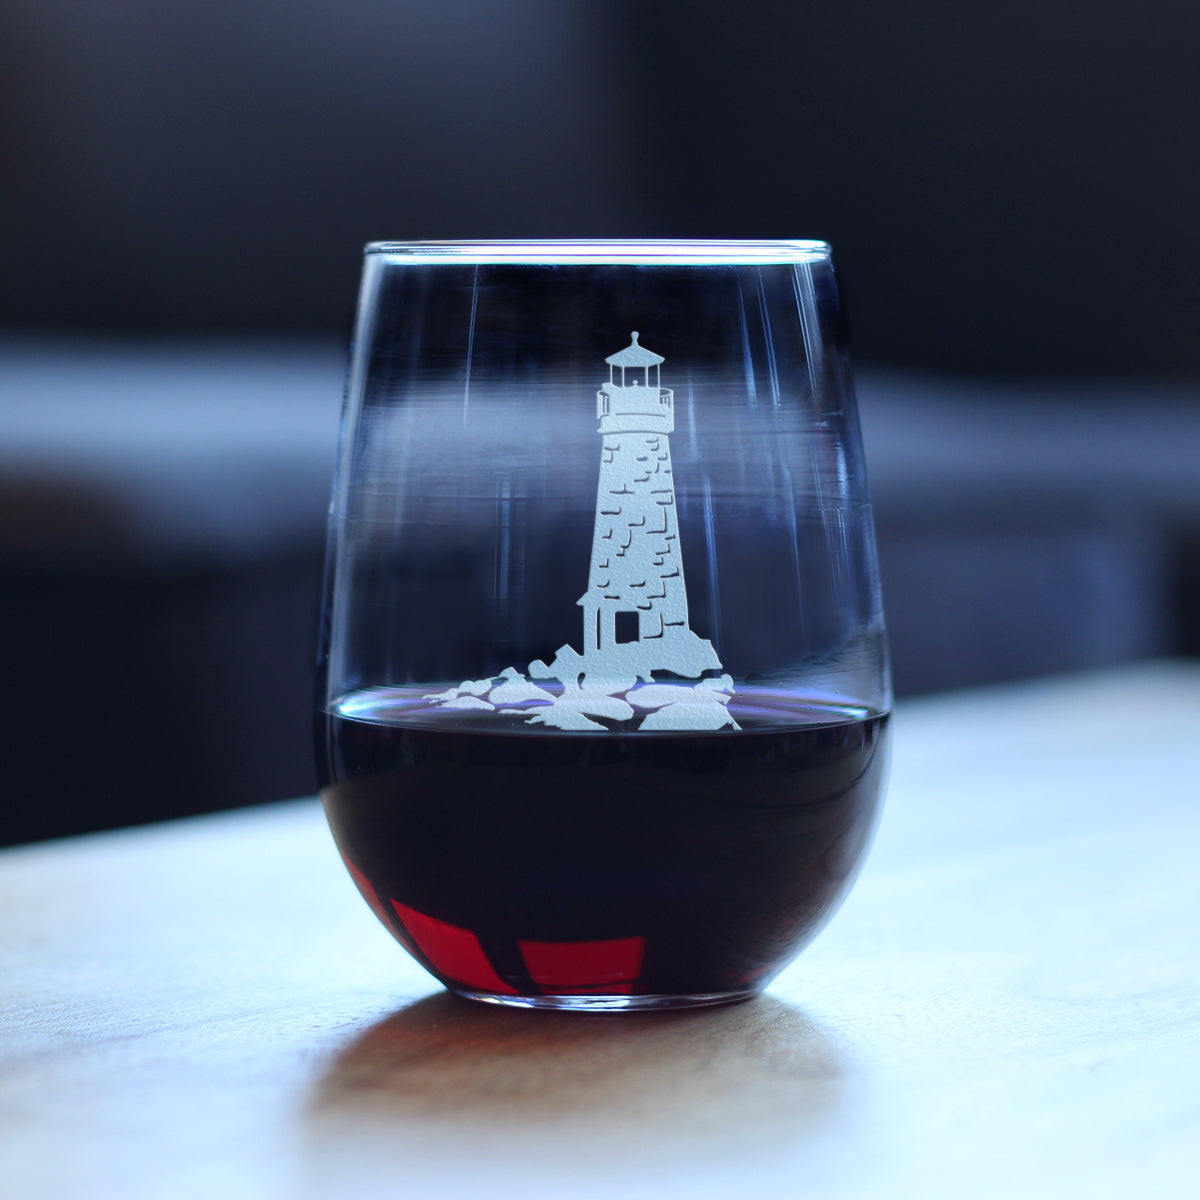 Lighthouse Stemless Wine Glass - Nautical Themed Decor and Gifts for Beach Lovers - Large 17 Oz Glasses